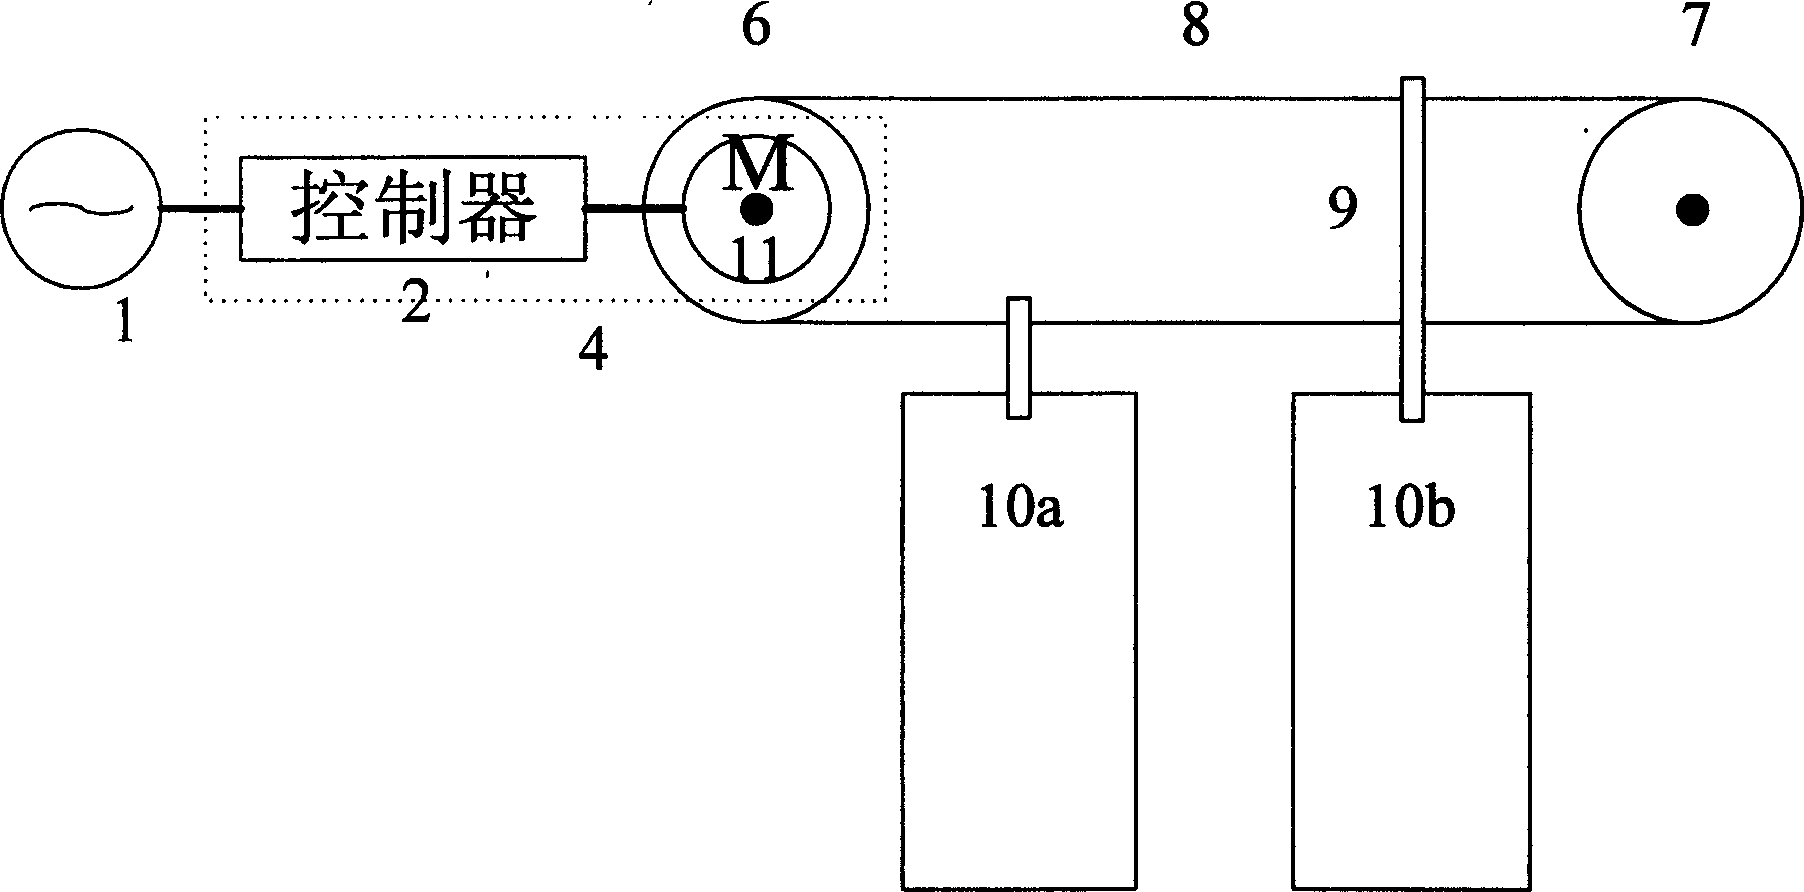 Gear free elevator door driving device with permanent-magnet synchronous motor